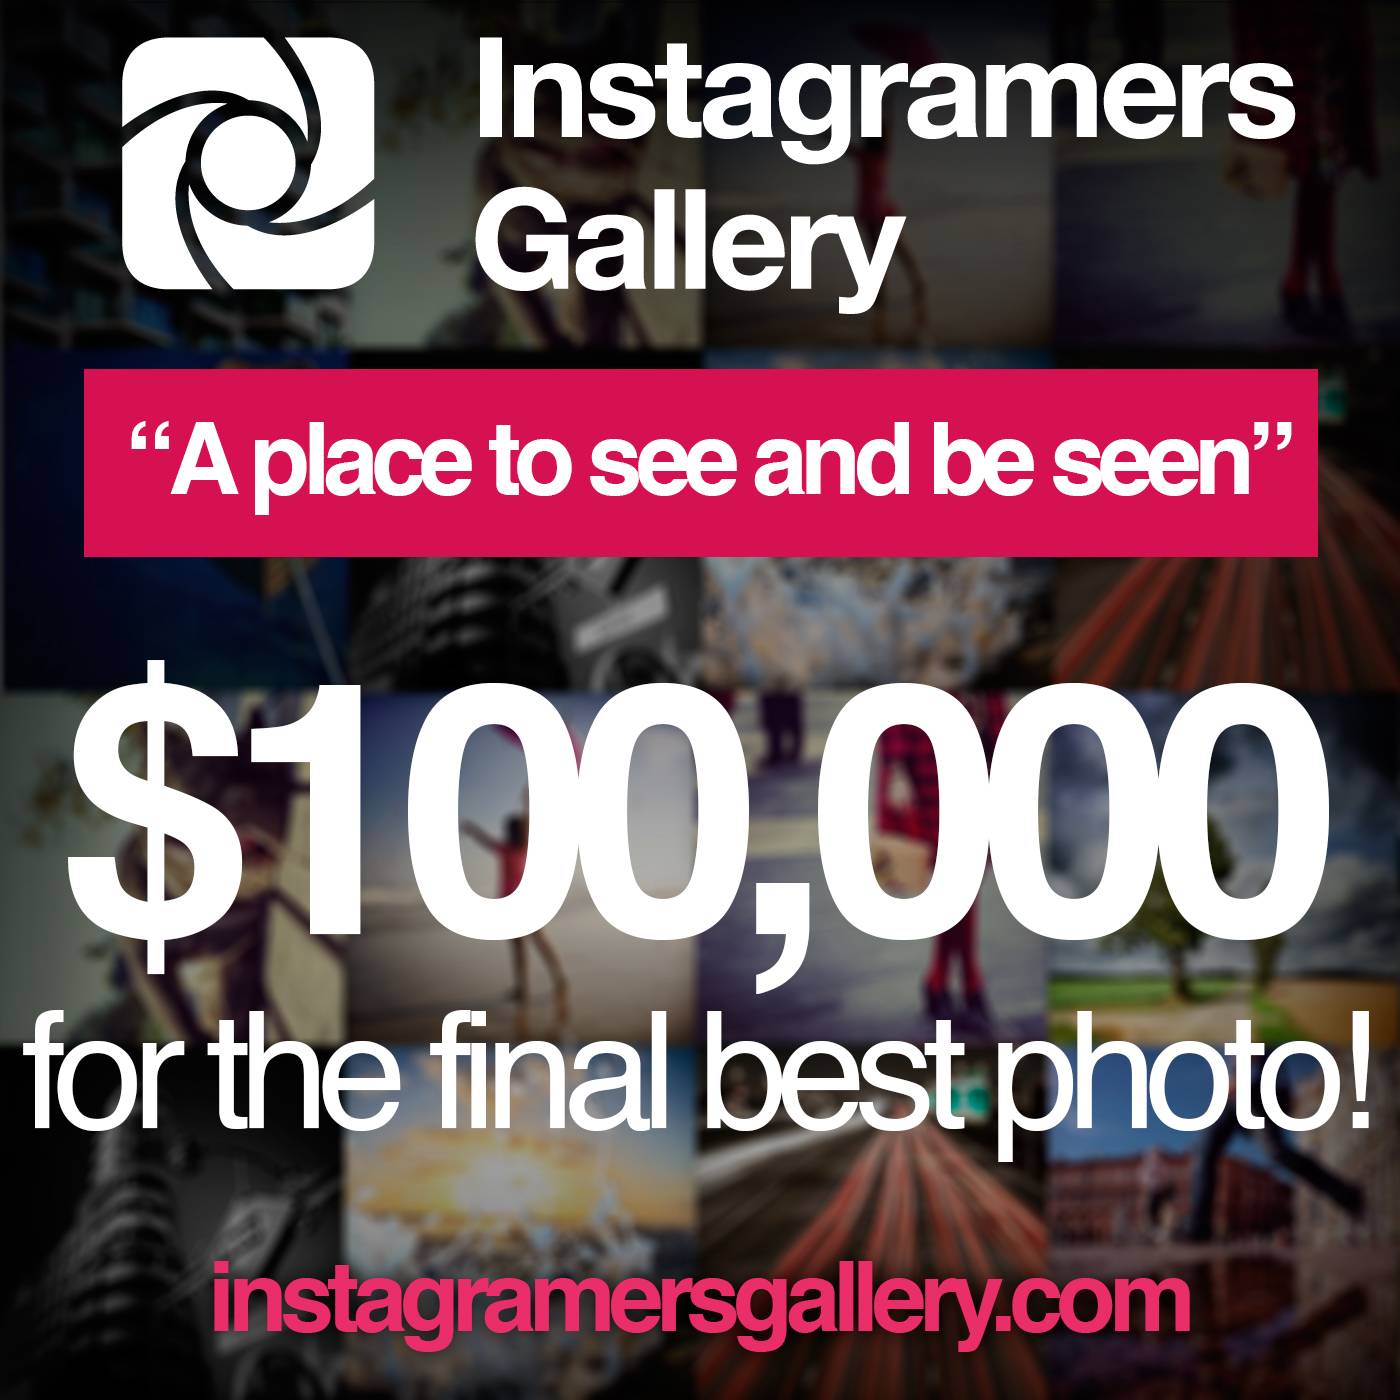 Last few days to win $100,000 at instagramersgallery.com